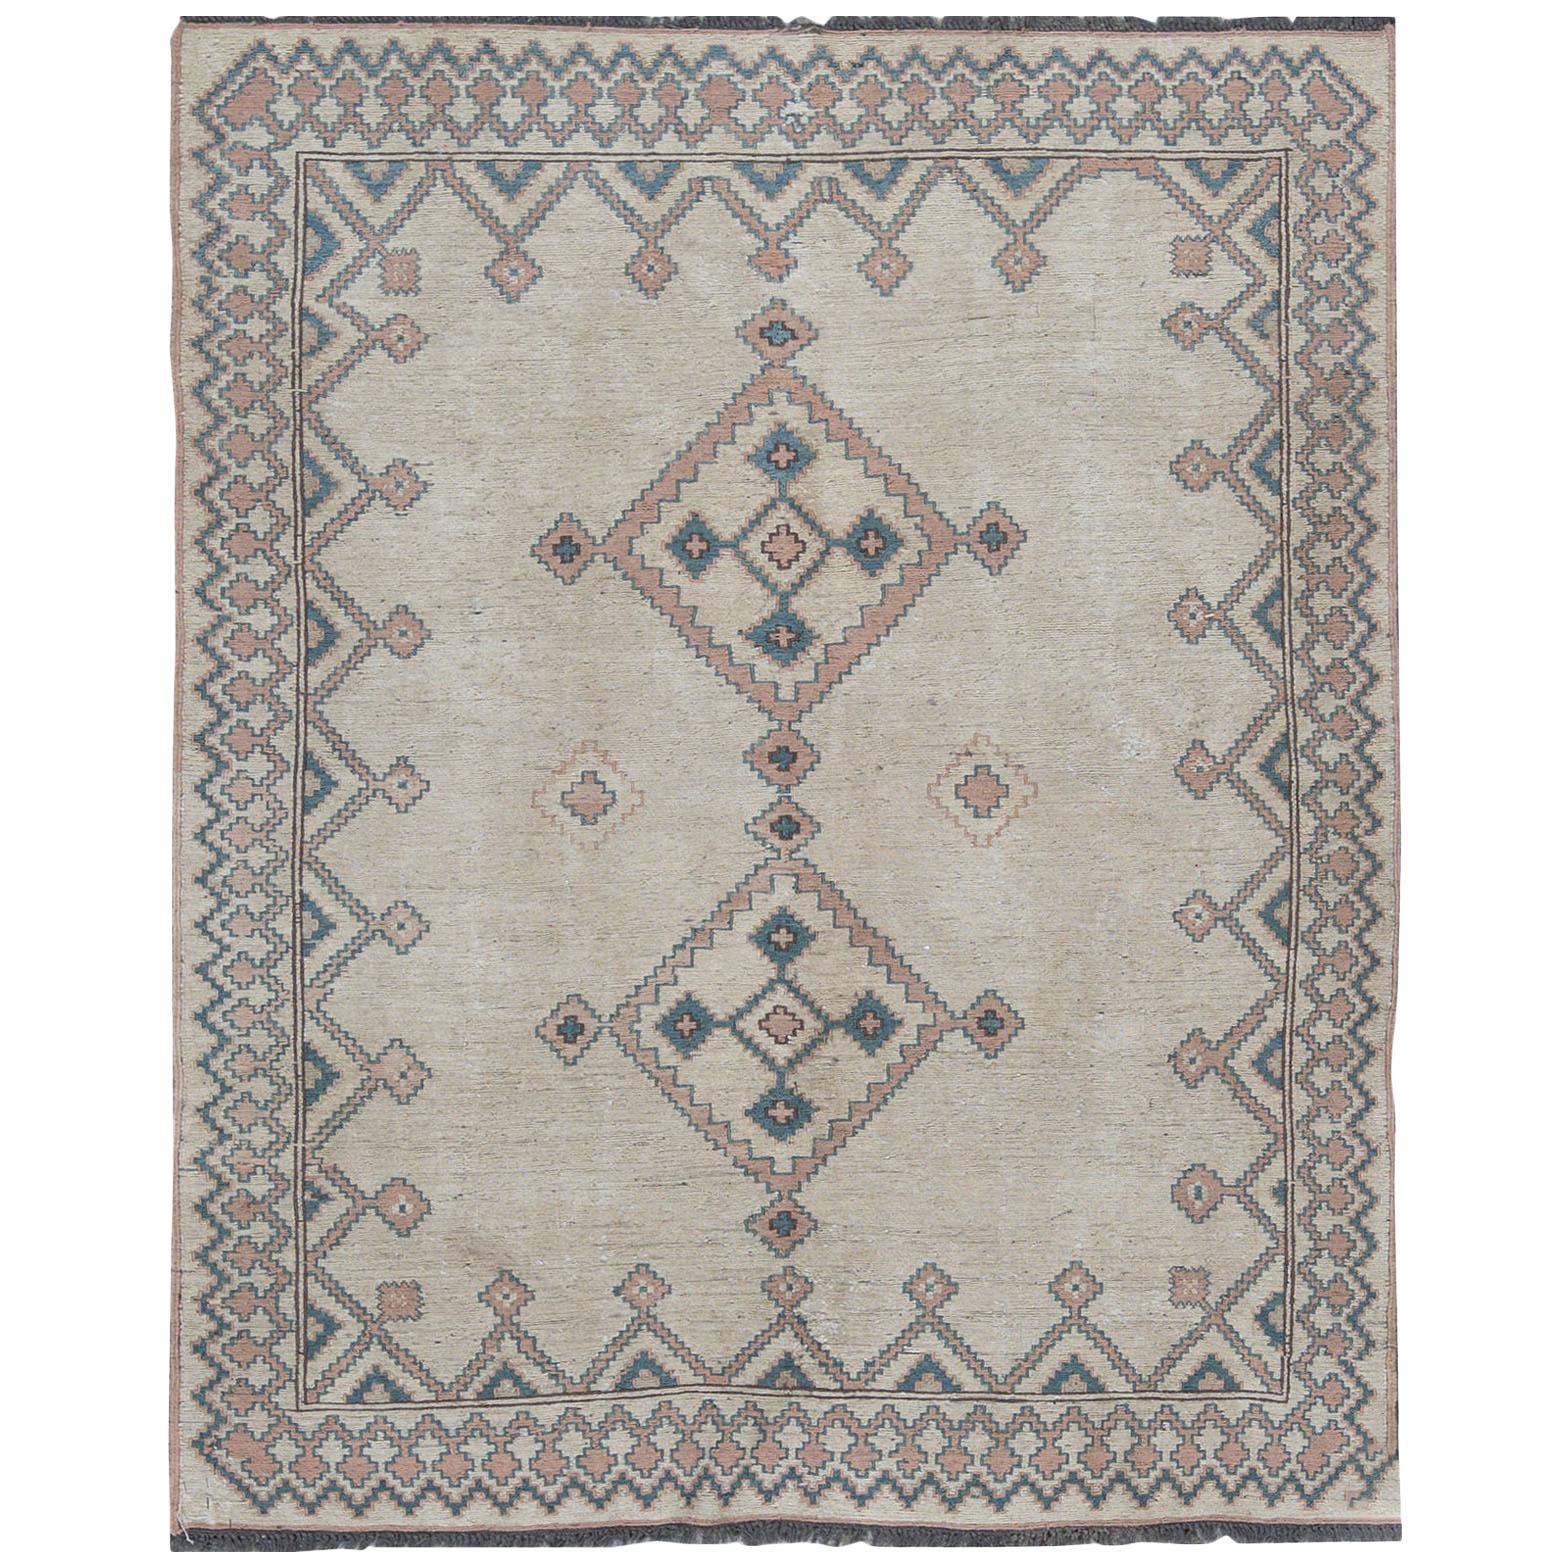 One-of-a-Kind Traditional Handwoven Antique Style Wool Area Rug  4’10" x 5’10”.